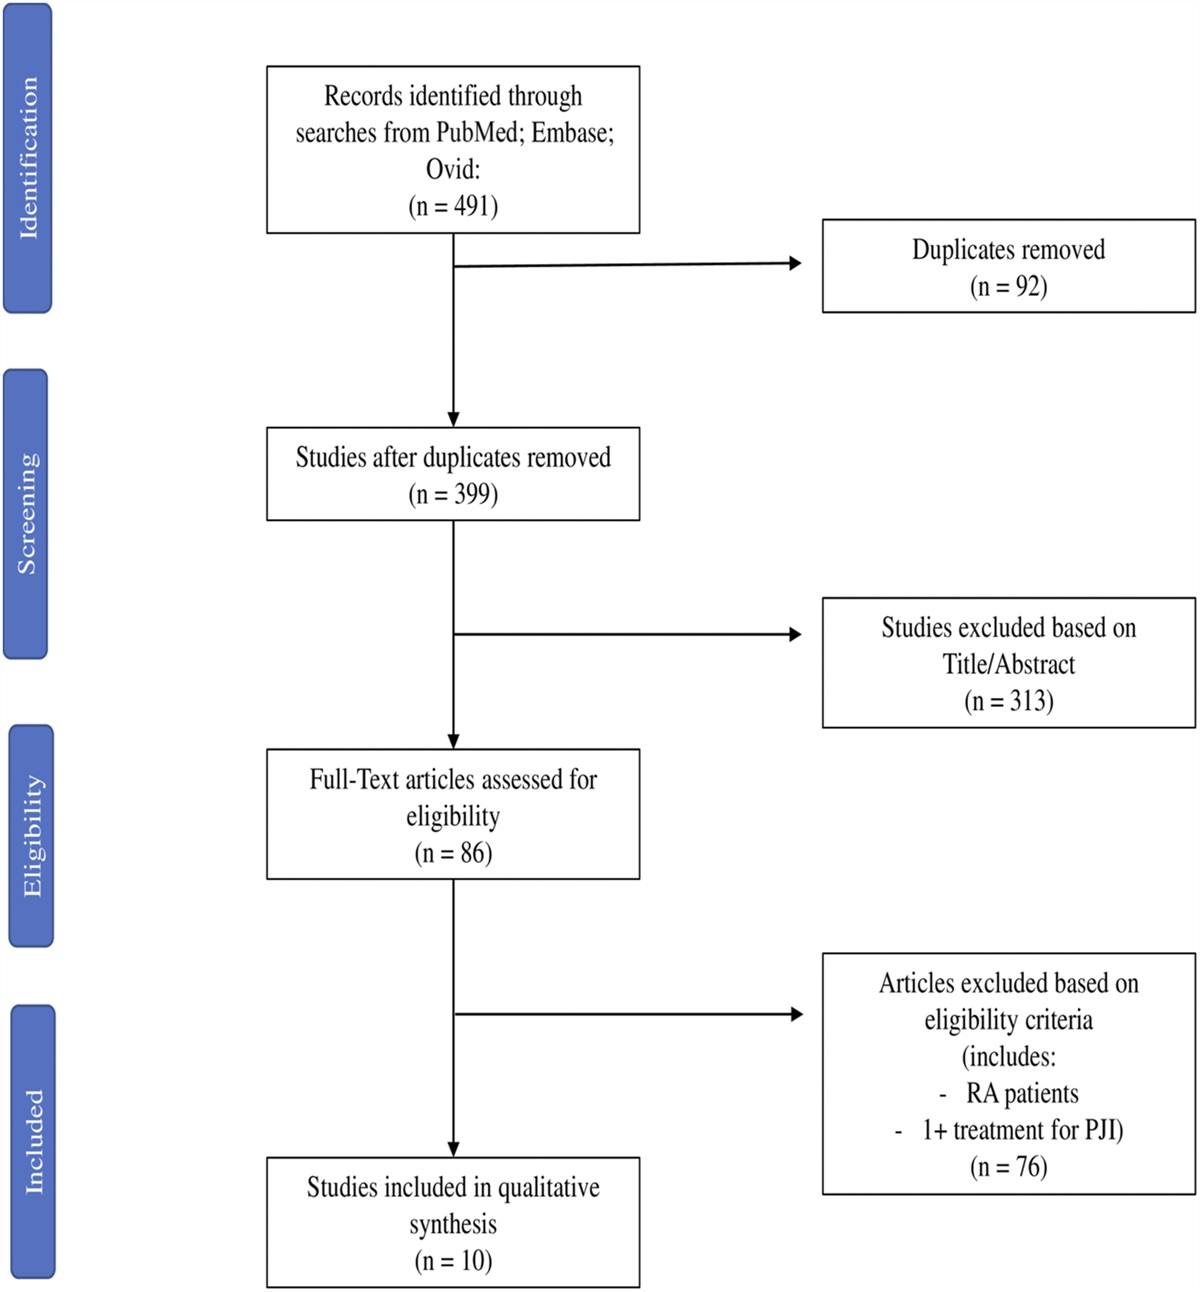 What Is the Most Effective Treatment for Periprosthetic Joint Infection After Total Joint Arthroplasty in Patients with Rheumatoid Arthritis?: A Systematic Review